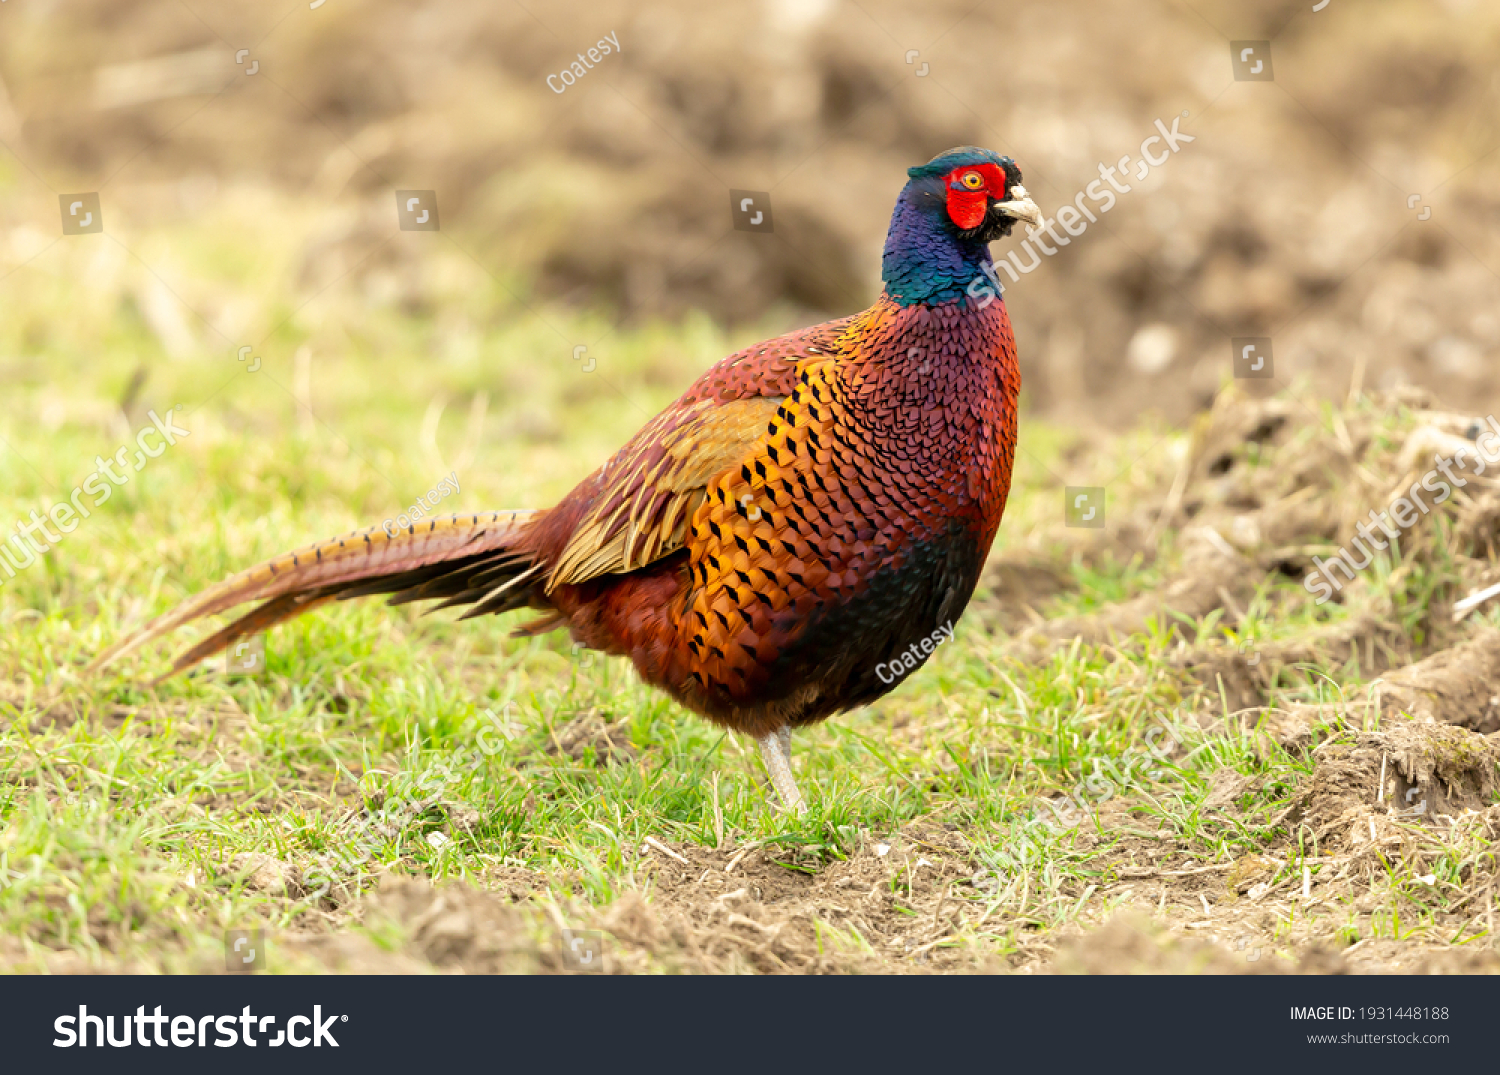 Close up of a  Ring-necked or Common male pheasant in Spring Time, foraging on a newly ploughed field.  Scientific name: Phasianus Colchicus.  Facing right.  Horizontal.  Space for copy. #1931448188